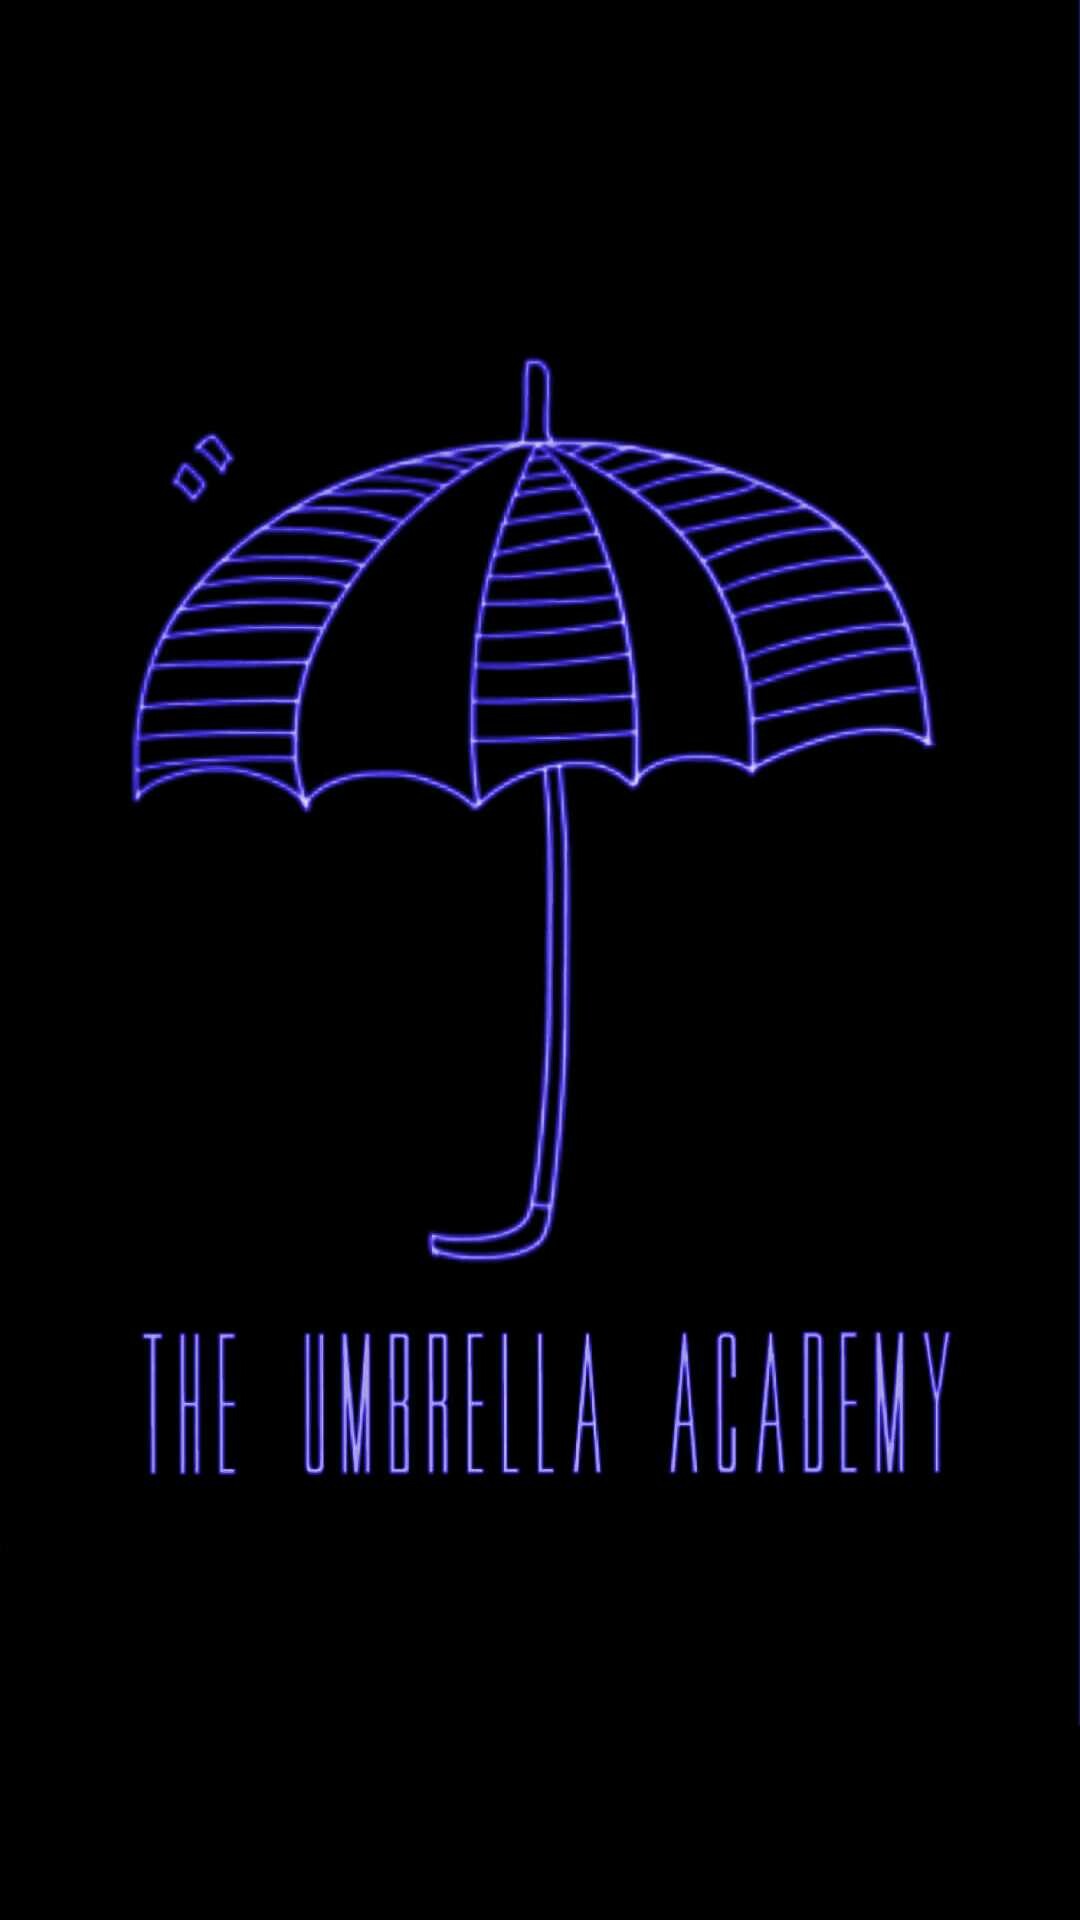 The Umbrella Academy: Netflix's series, Adapted by Stephen Blackman from the comics of the same name. 1080x1920 Full HD Background.